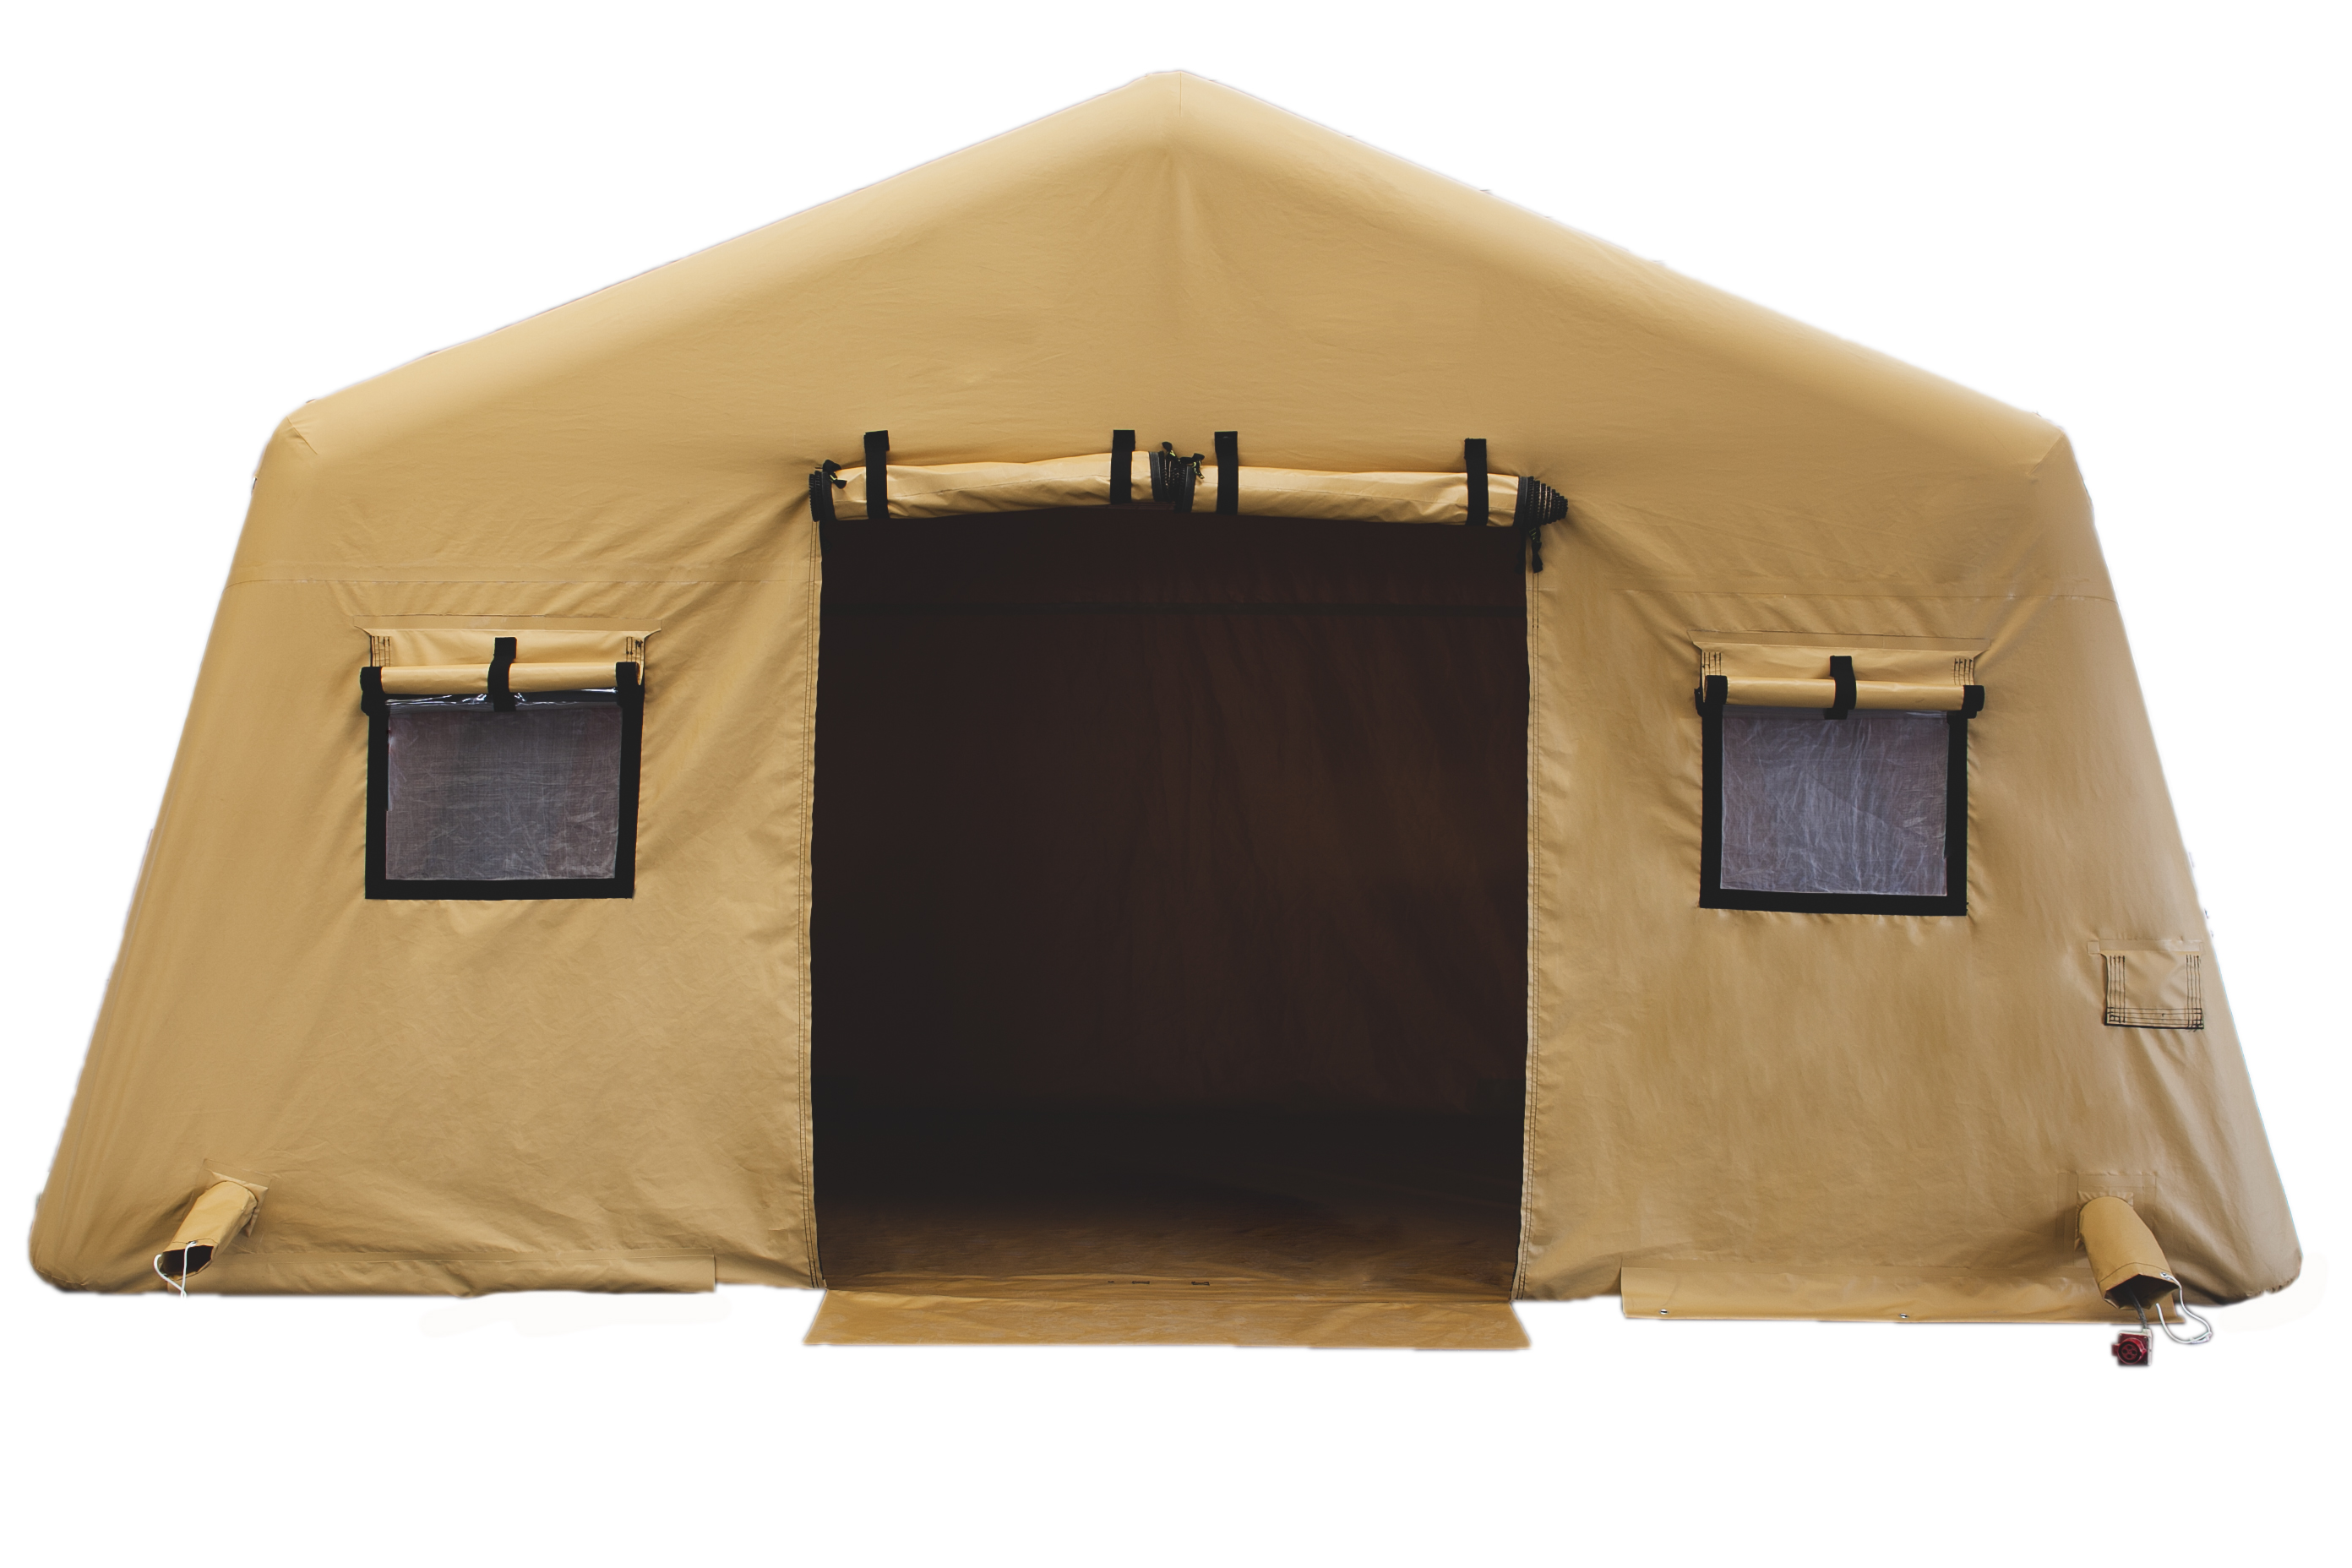 Self-supporting inflatable tent - Cod. TD0036